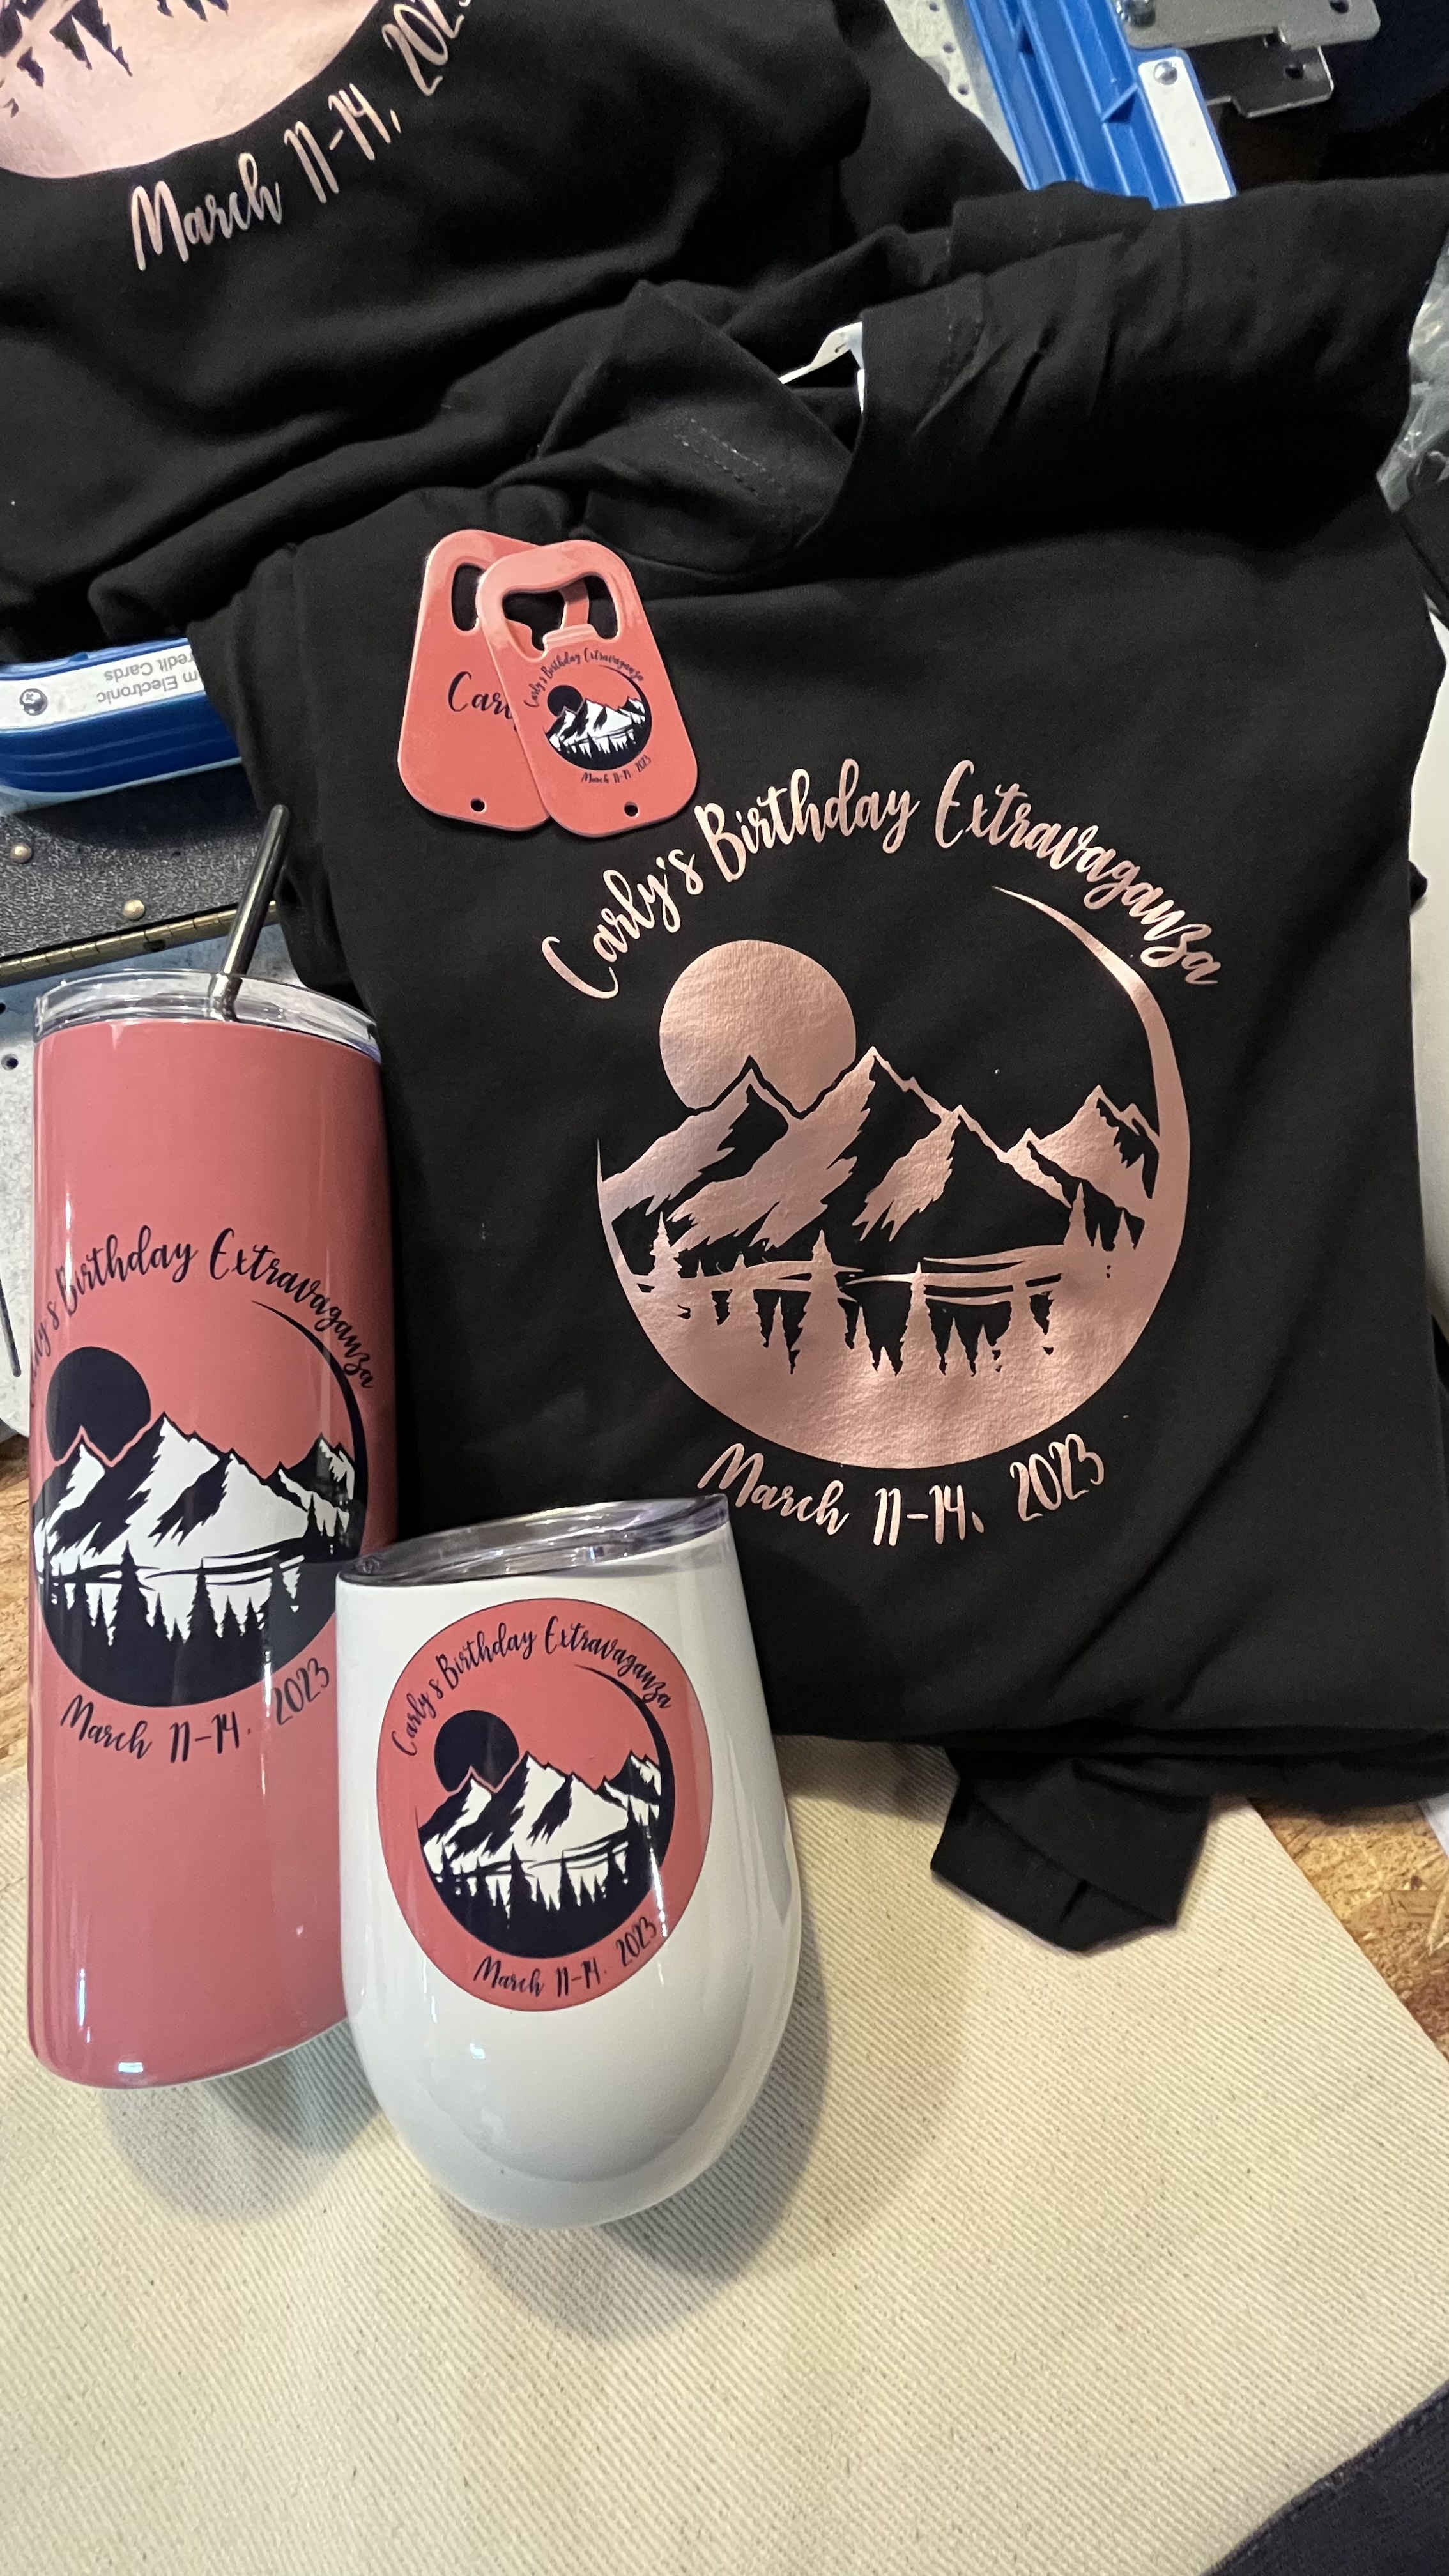 Custom package for a girls getaway to celebrate a 30TH birthday!  Also made shirts to match.  L